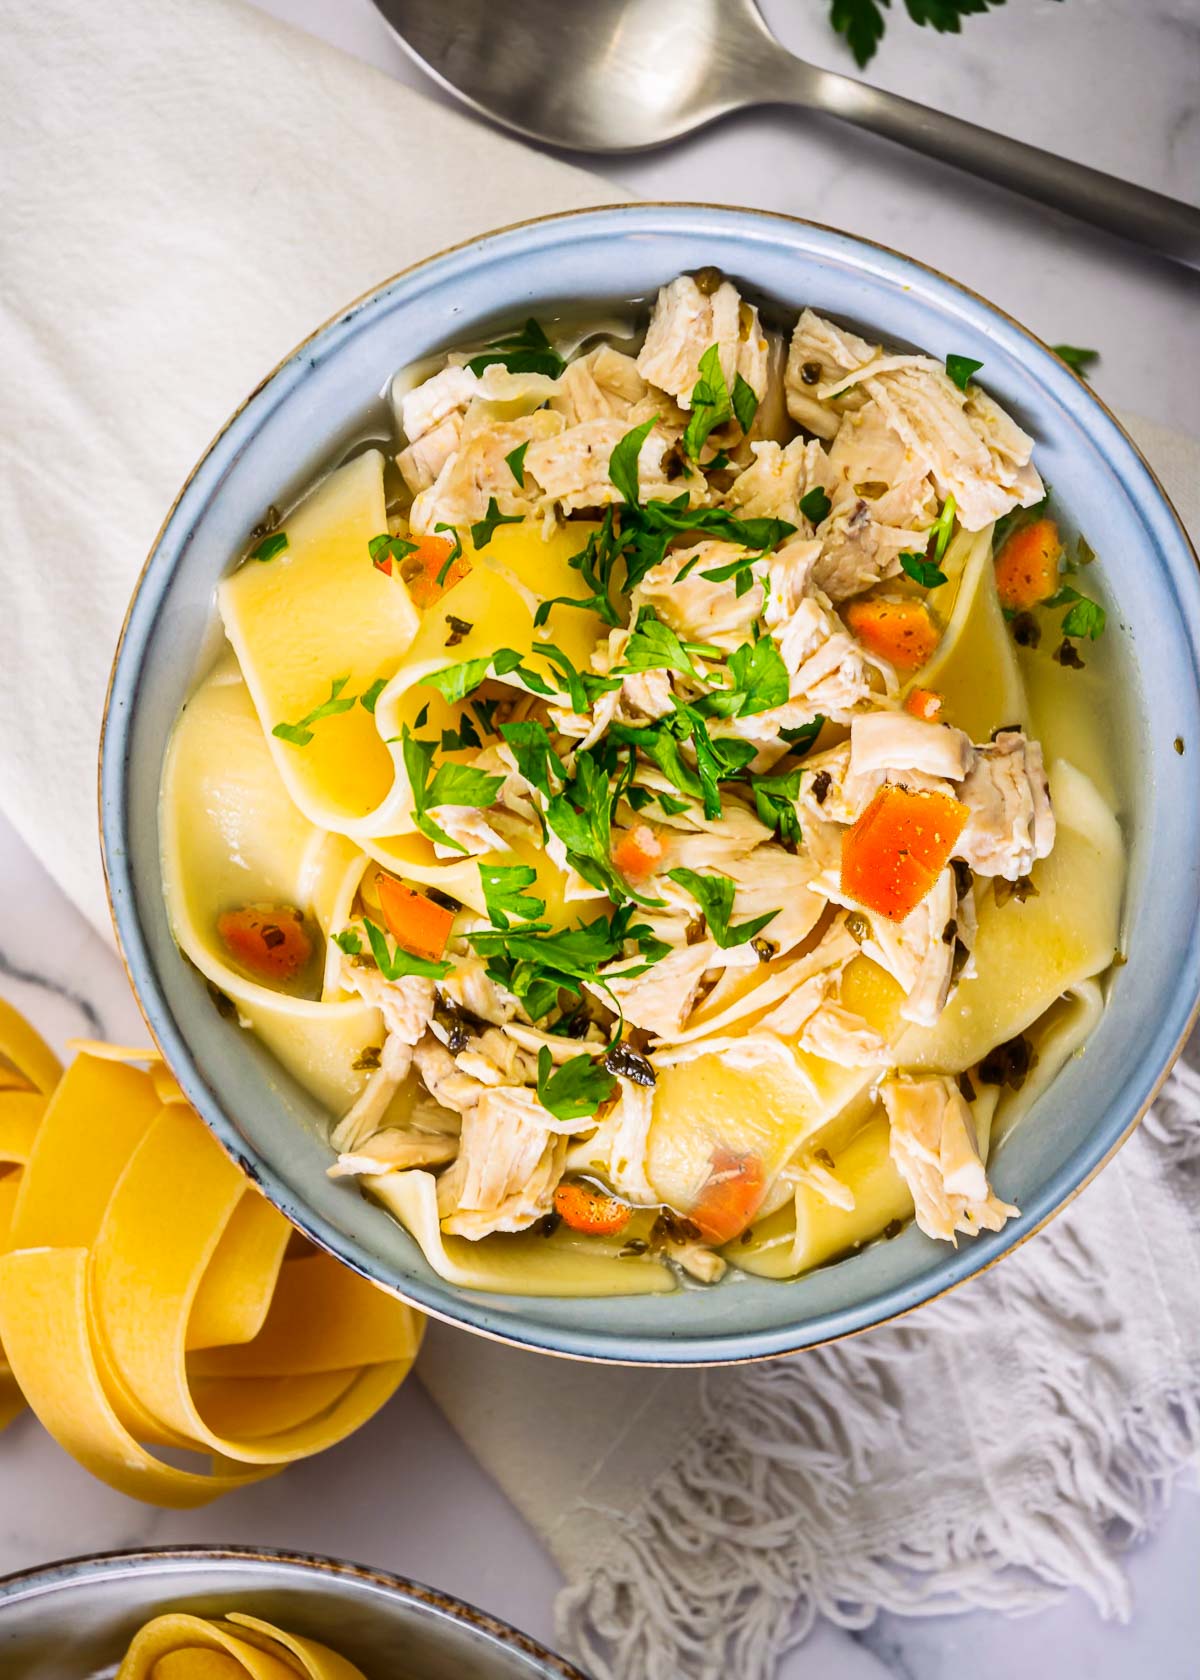 Instant pot chicken noodle soup with parsley in blue bowl.